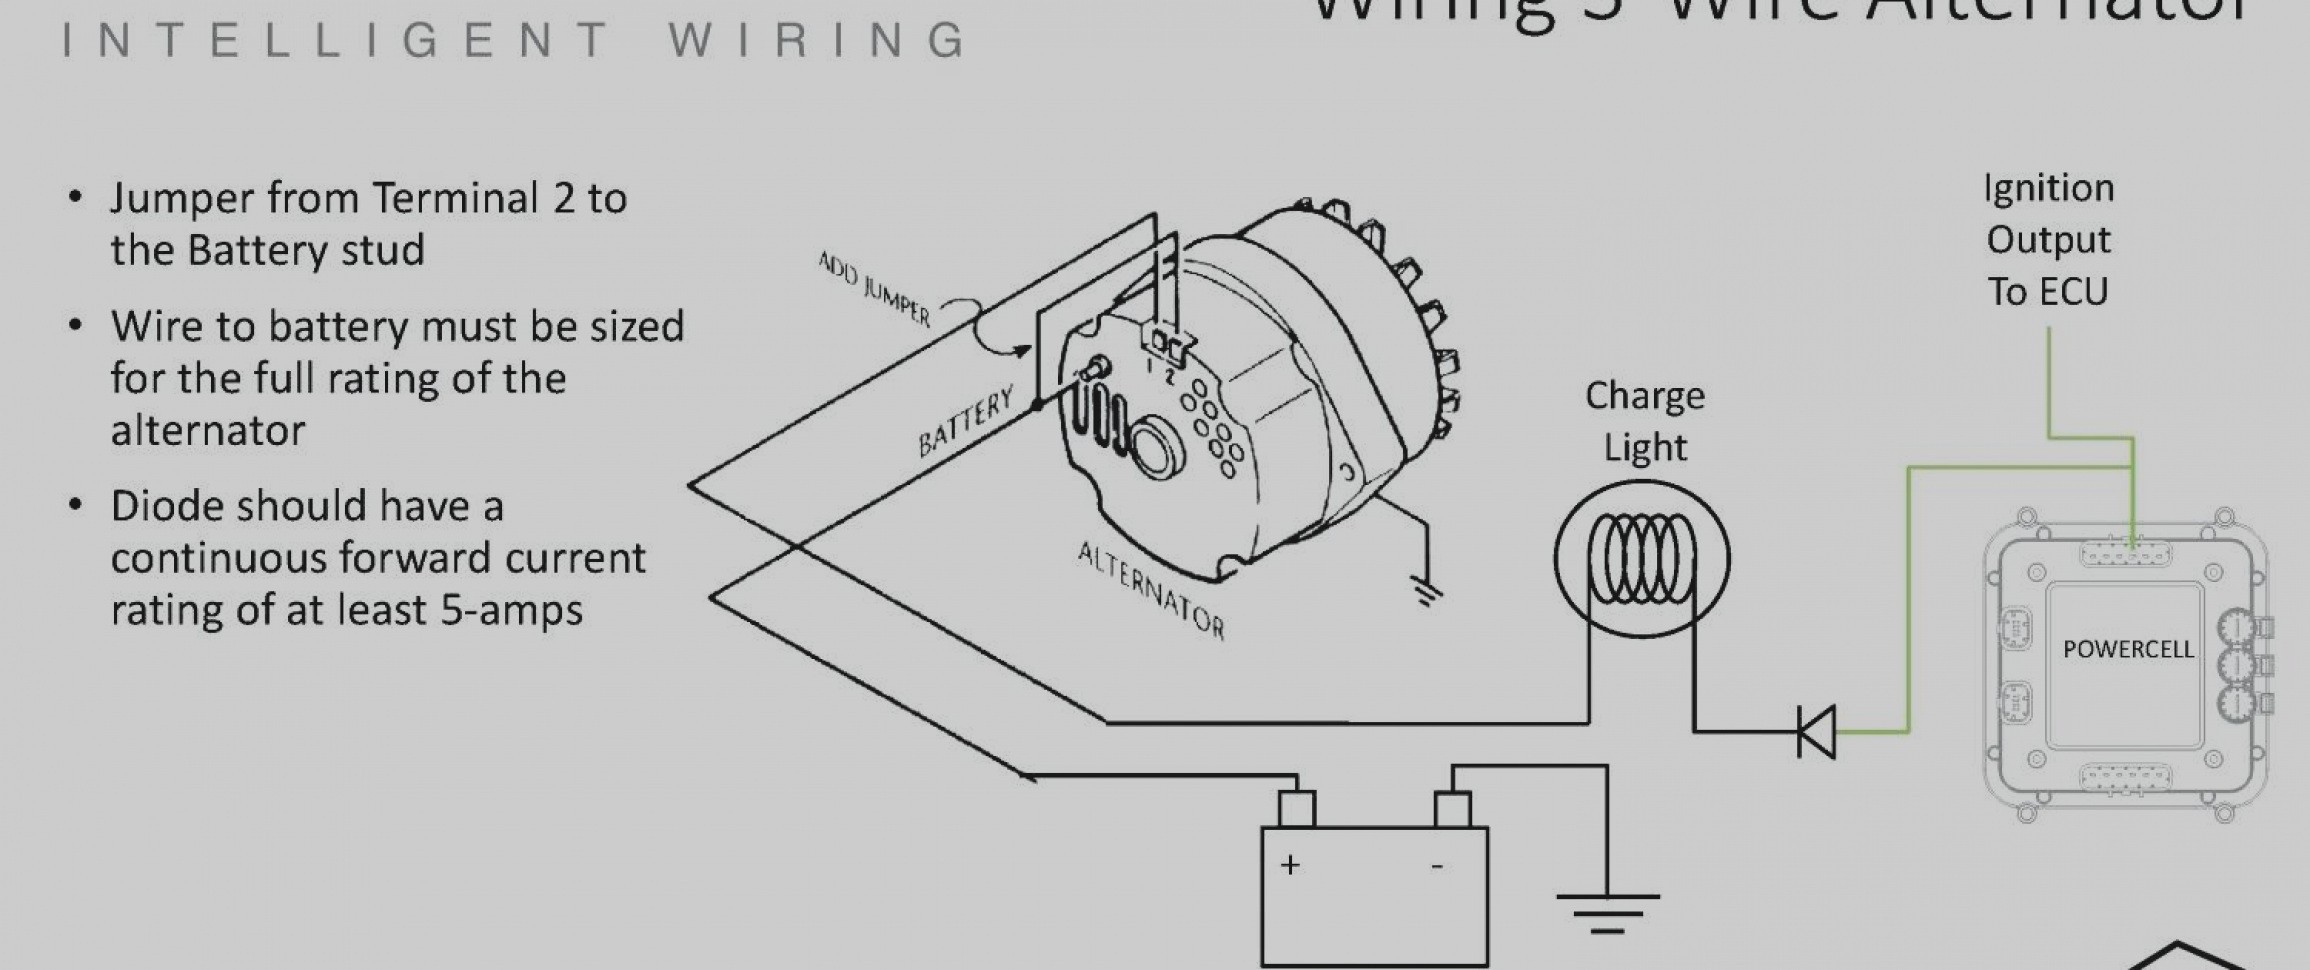 Alternator Wiring Diagram Chevy Simple Rb25 Alternator Wiring Diagram Valid Alternator Wiring Diagram For